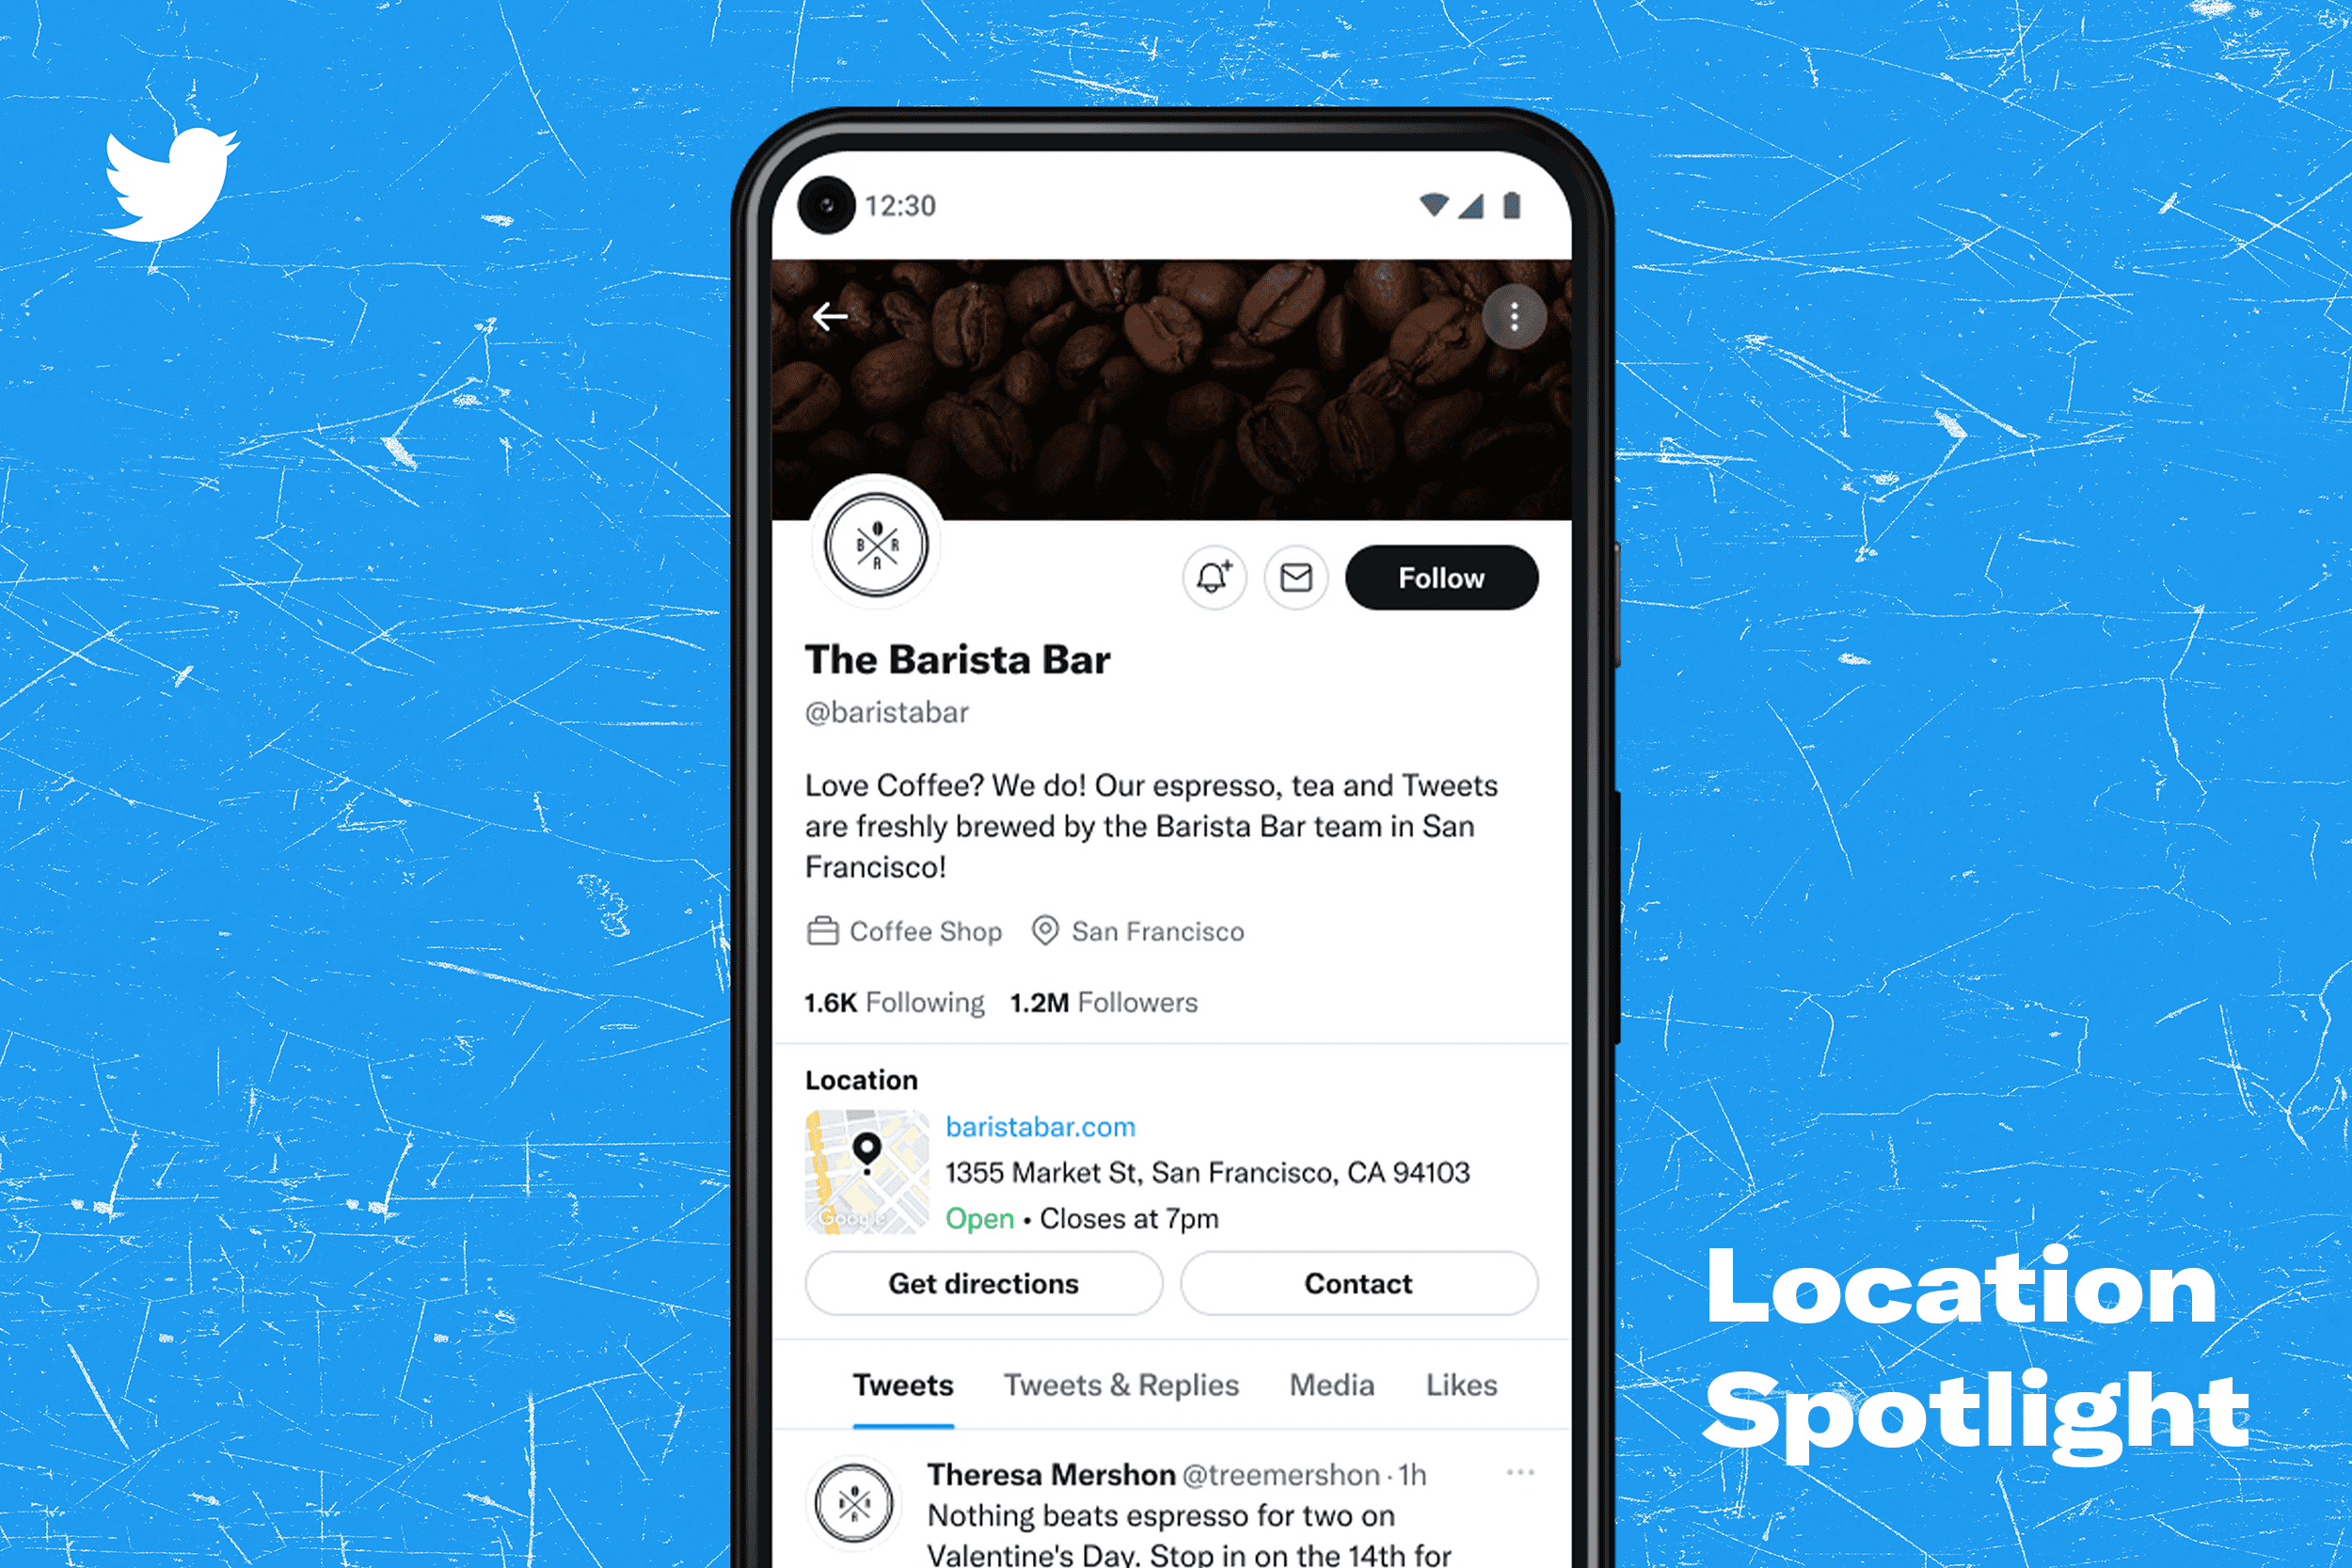 Location Spotlight launches on Twitter